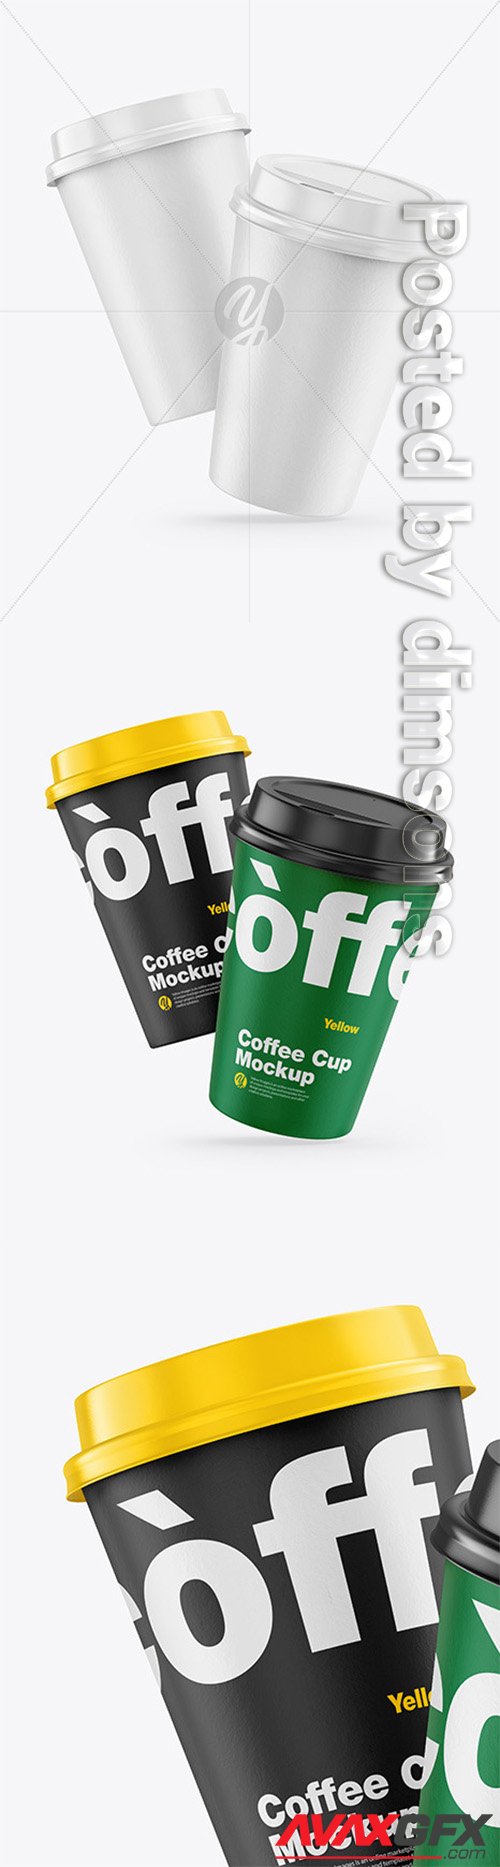 Download Paper Coffee Cup With Sleeve Mockup 333541394 Avaxgfx All Downloads That You Need In One Place Graphic From Nitroflare Rapidgator Yellowimages Mockups